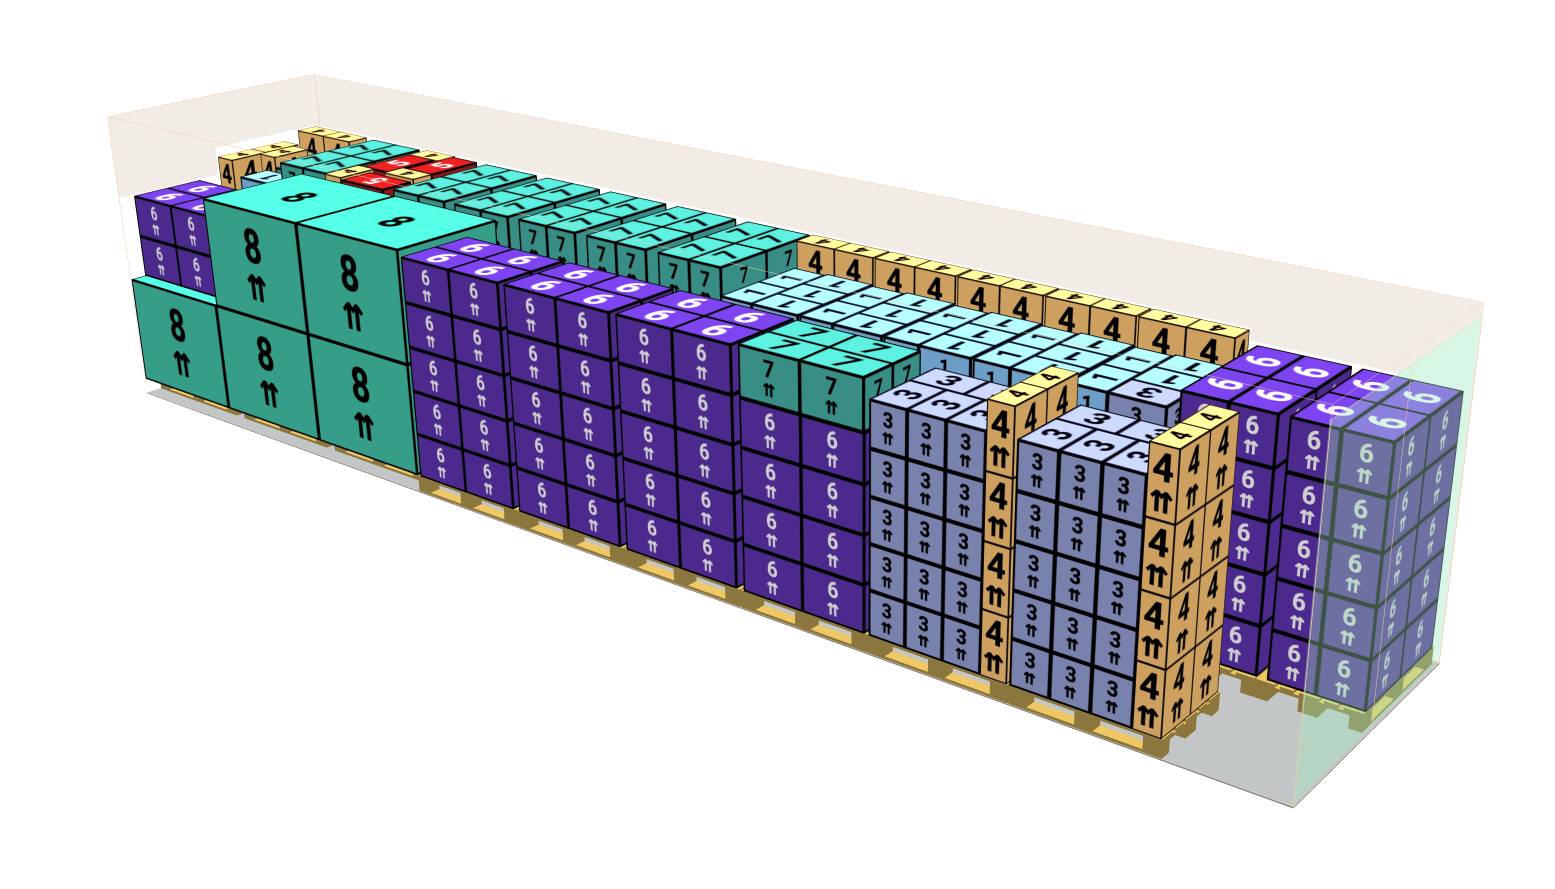 /_astro/container with pallets